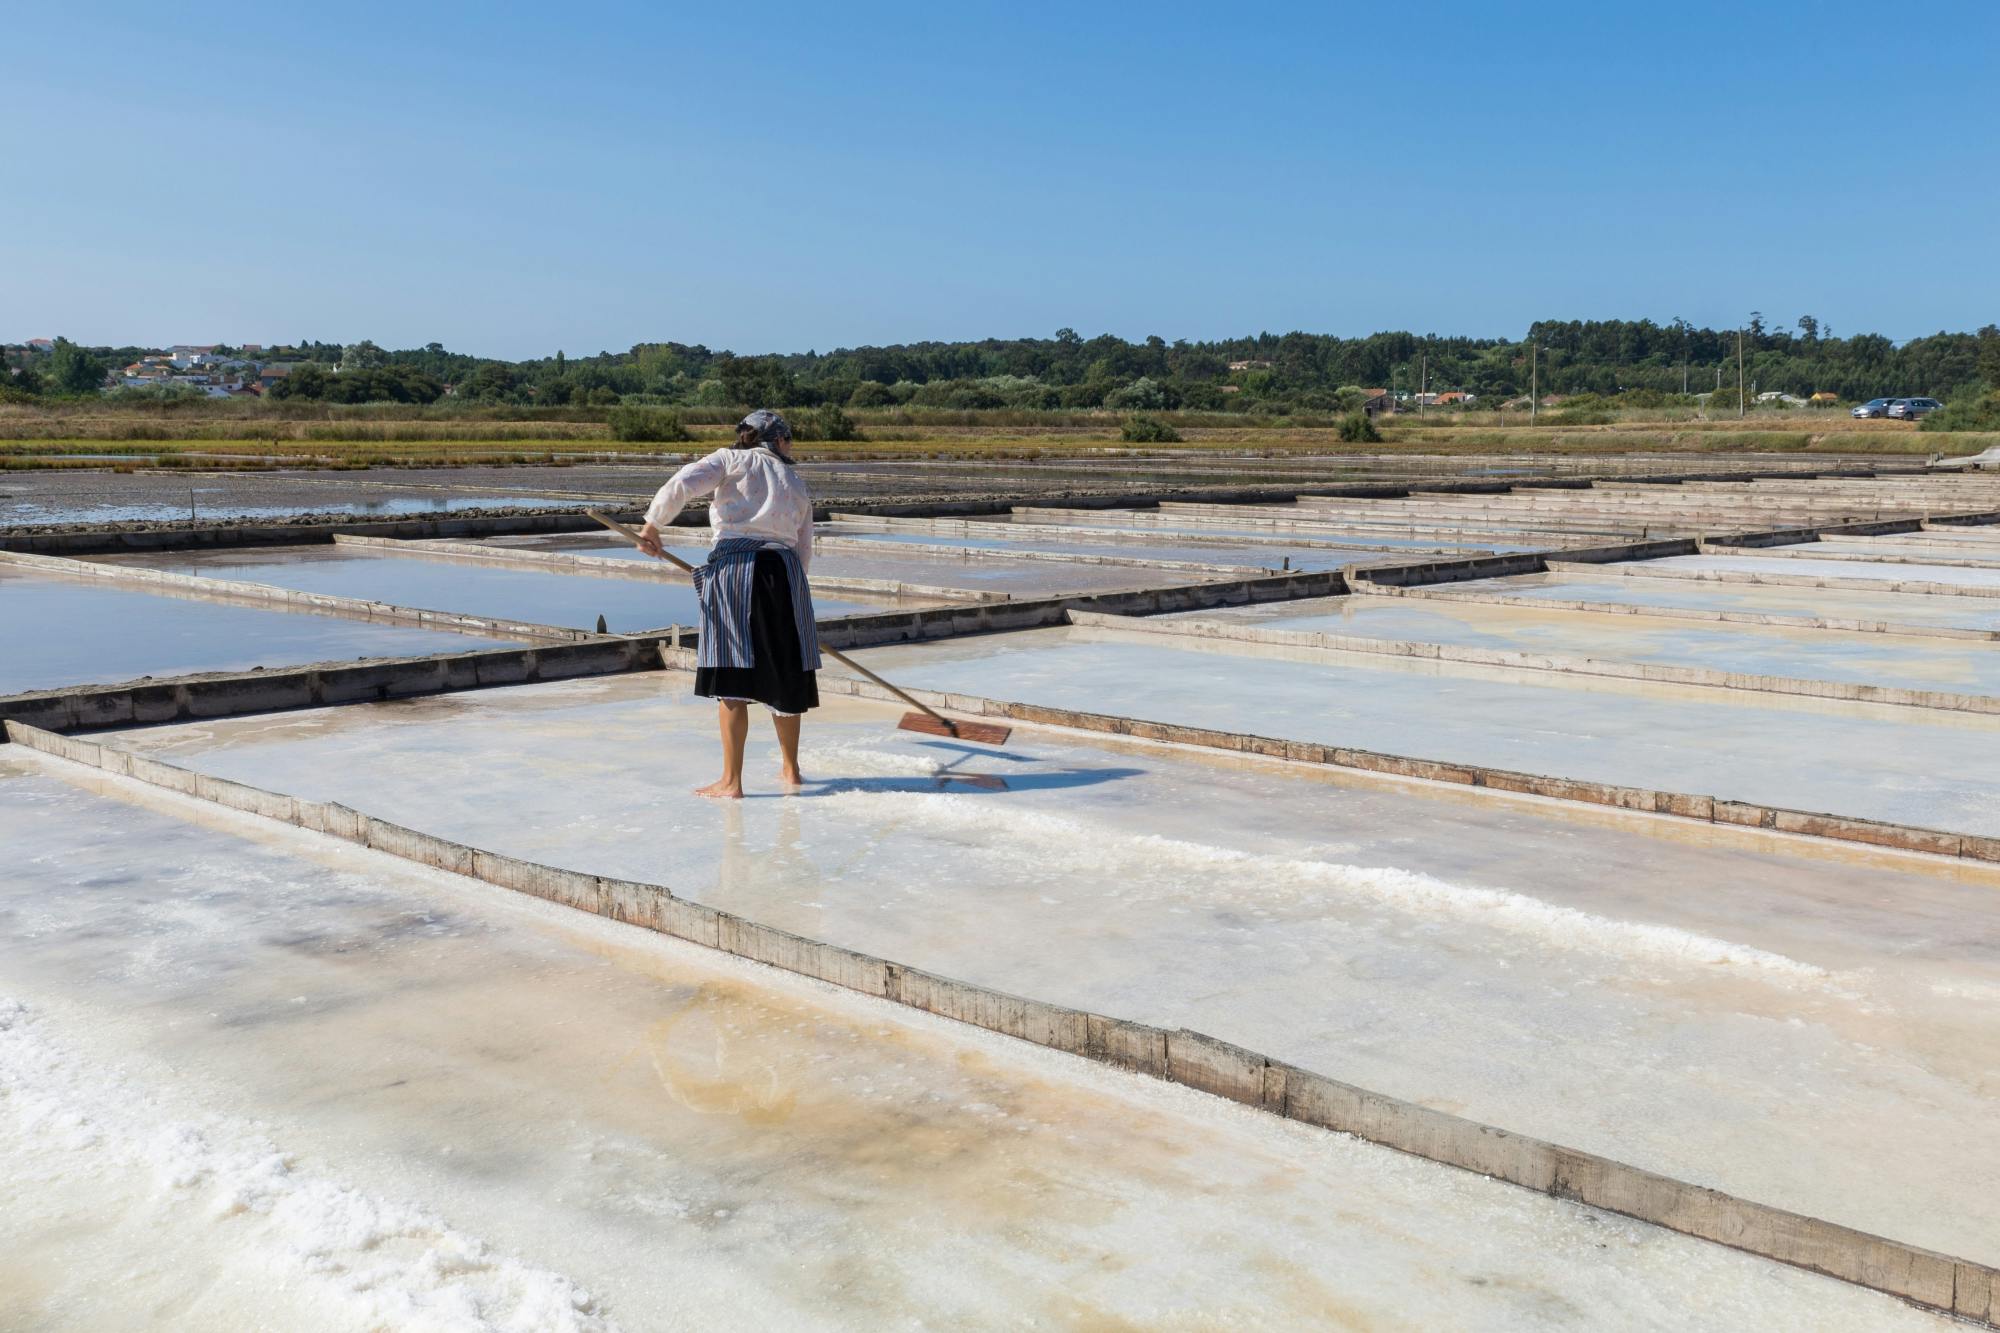 Figueira da Foz rice paddies and saline pans excursion from Coimbra Musement